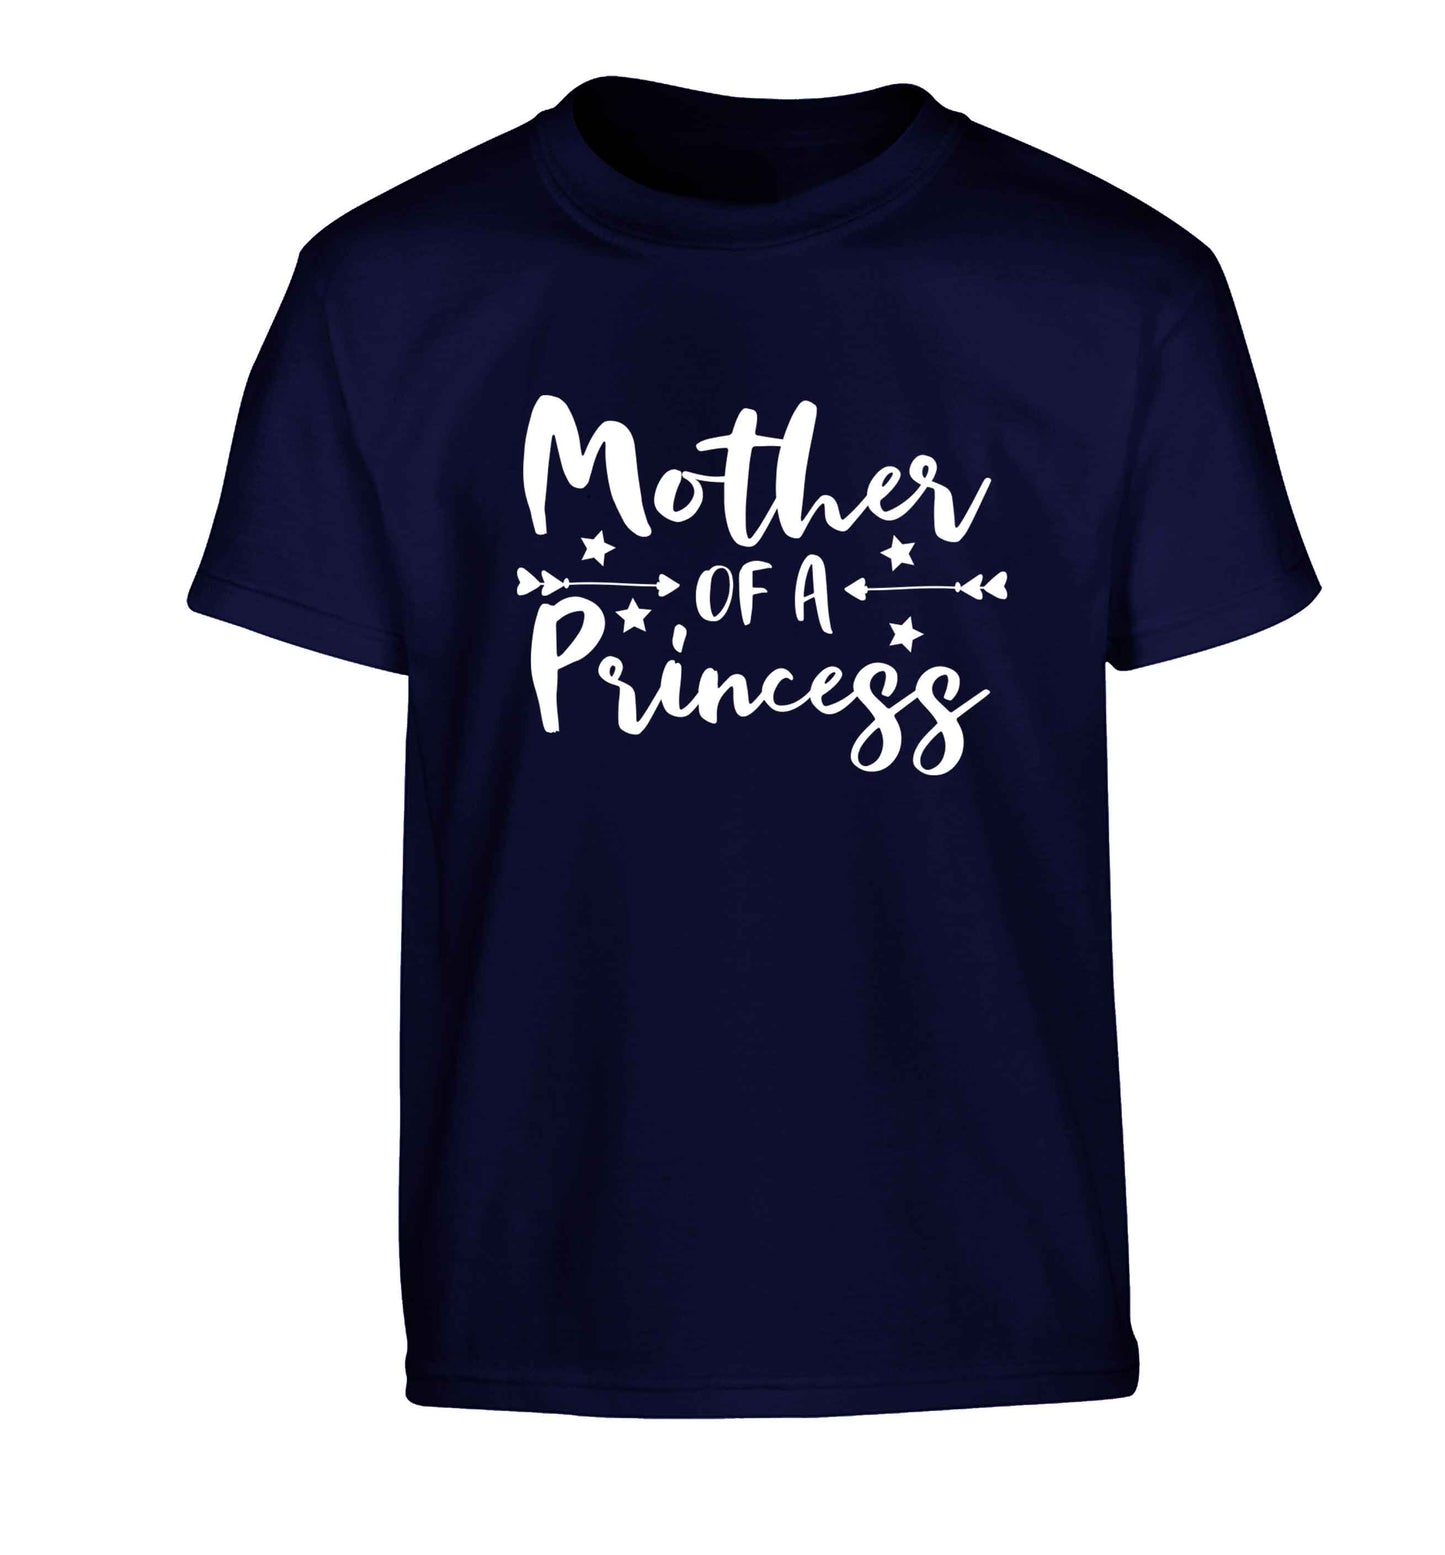 Mother of a princess Children's navy Tshirt 12-13 Years